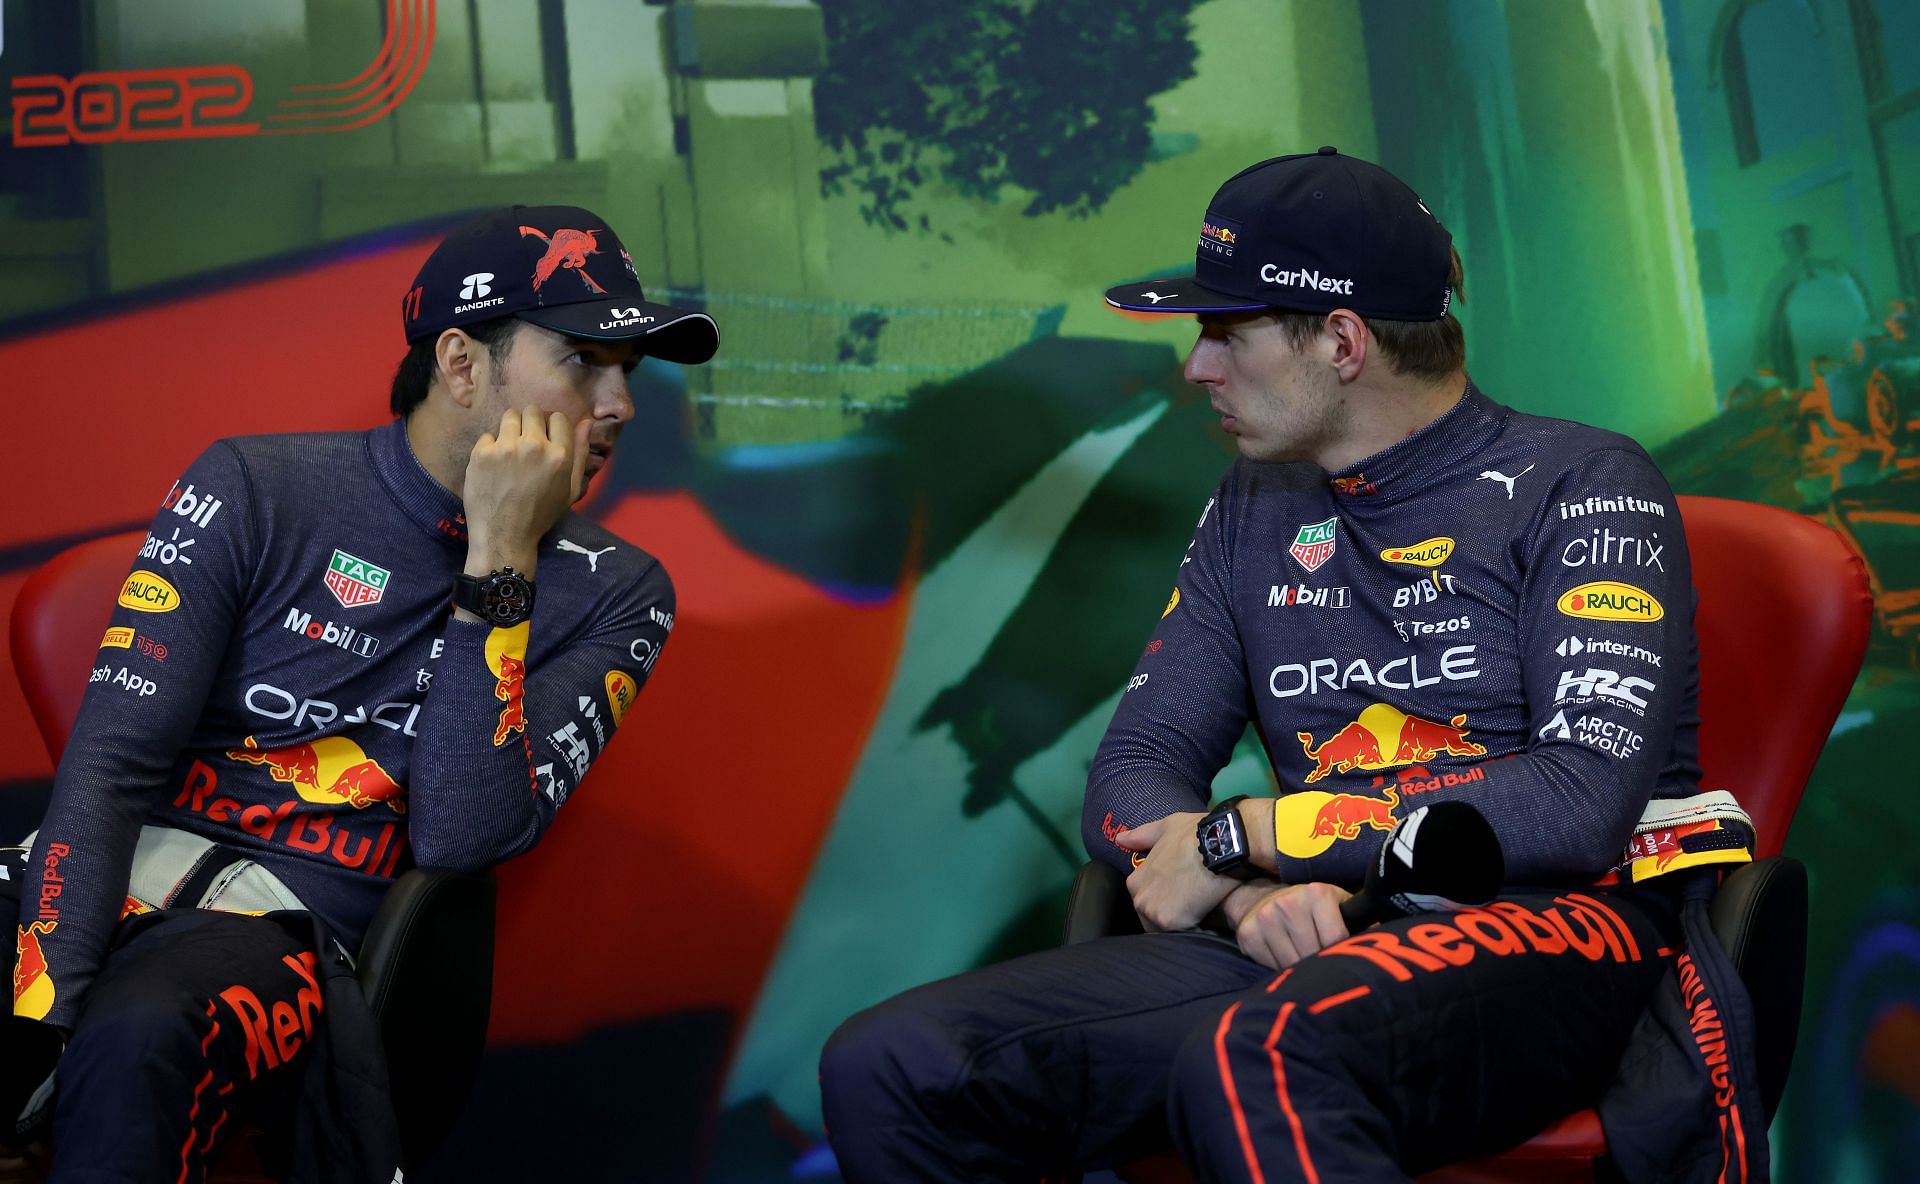 At the 2022 F1 Azerbaijan GP, Max Verstappen (right) just showed Sergio Perez (left) who the boss is